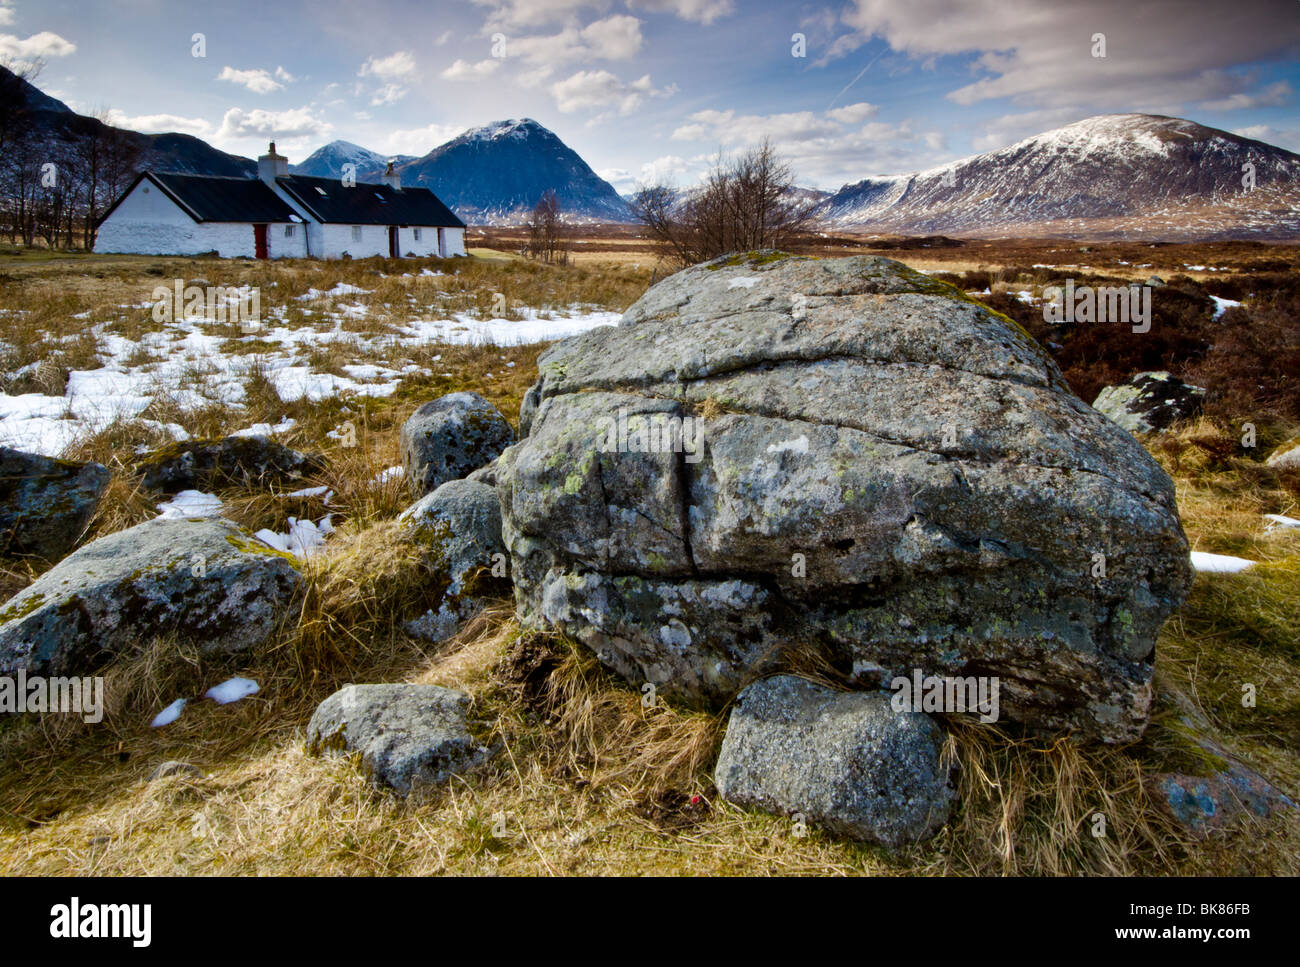 Black Rock Cottage sits beside the road that leads to the glencoe ski centre. The mountain behind is Buchaille Etive Mor. Stock Photo